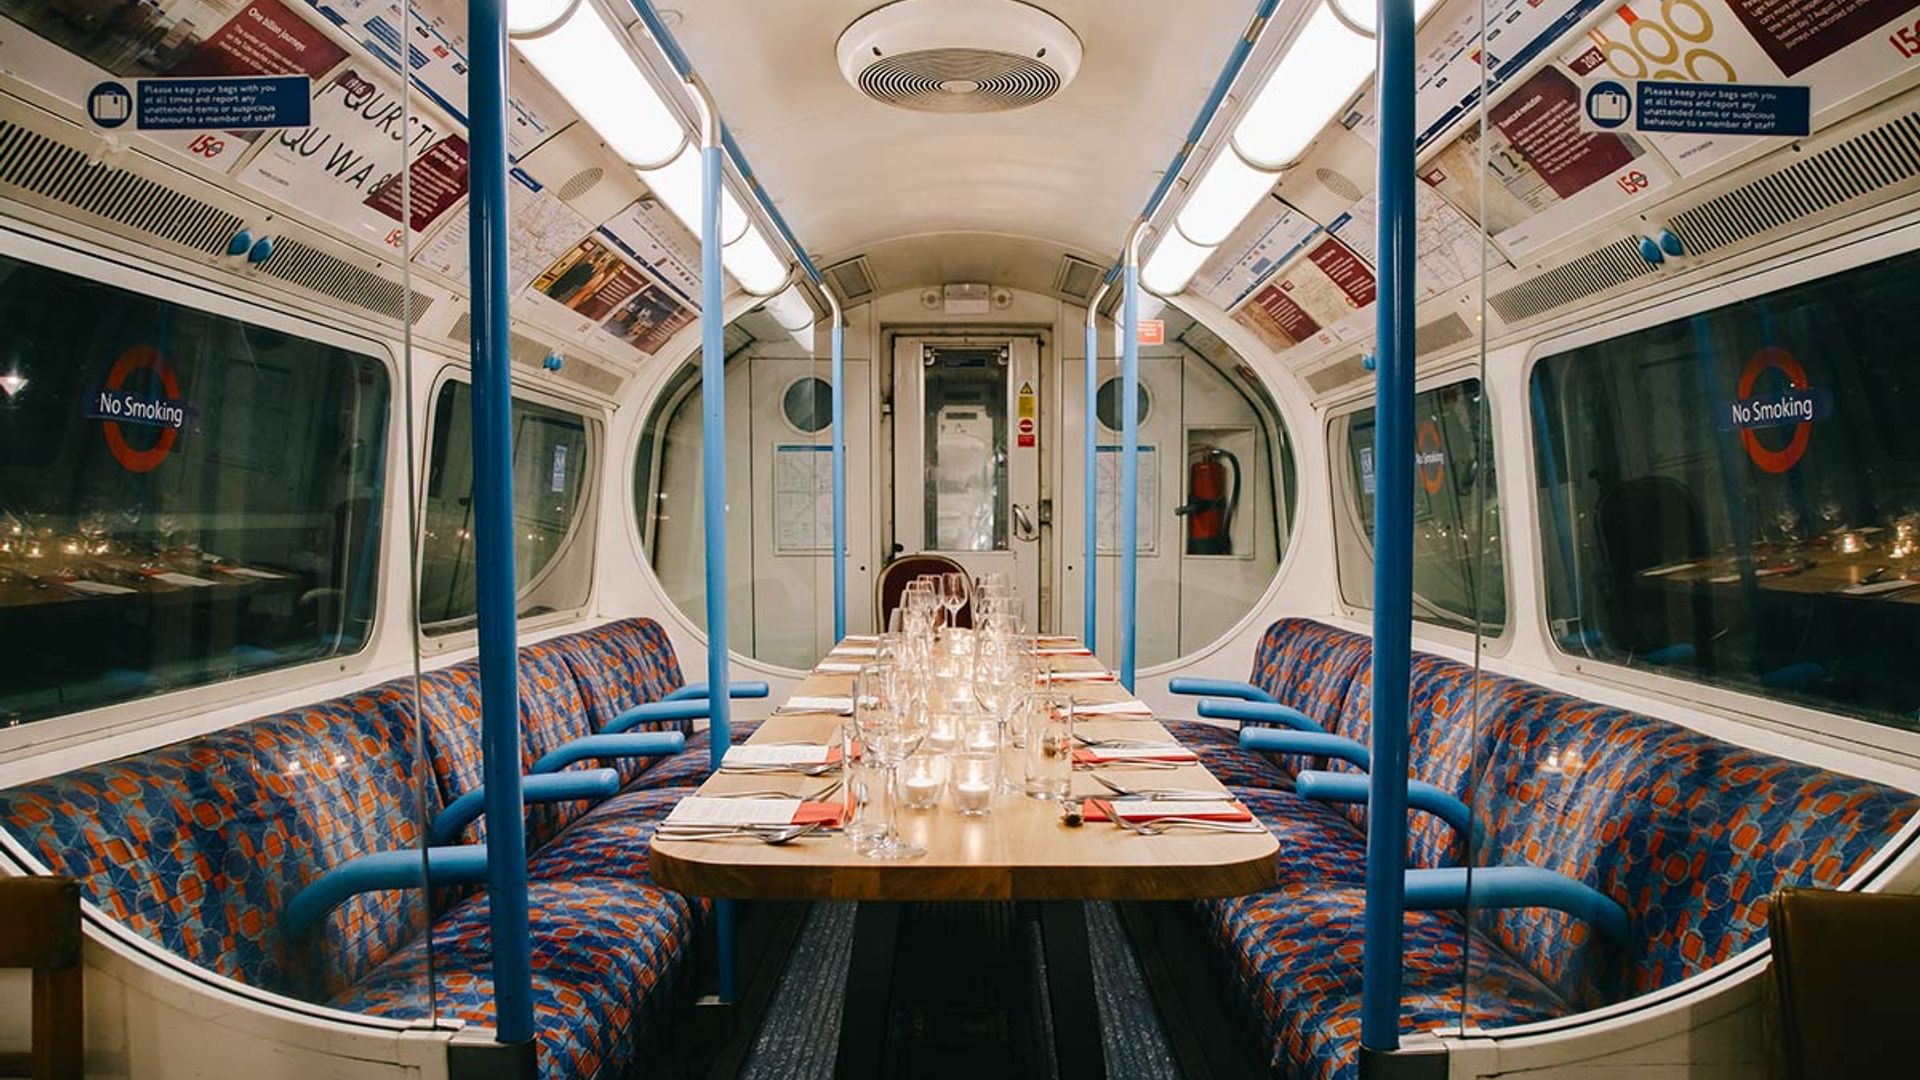 Review: Ever fancied dining on the tube? Look no further than supperclub.tube